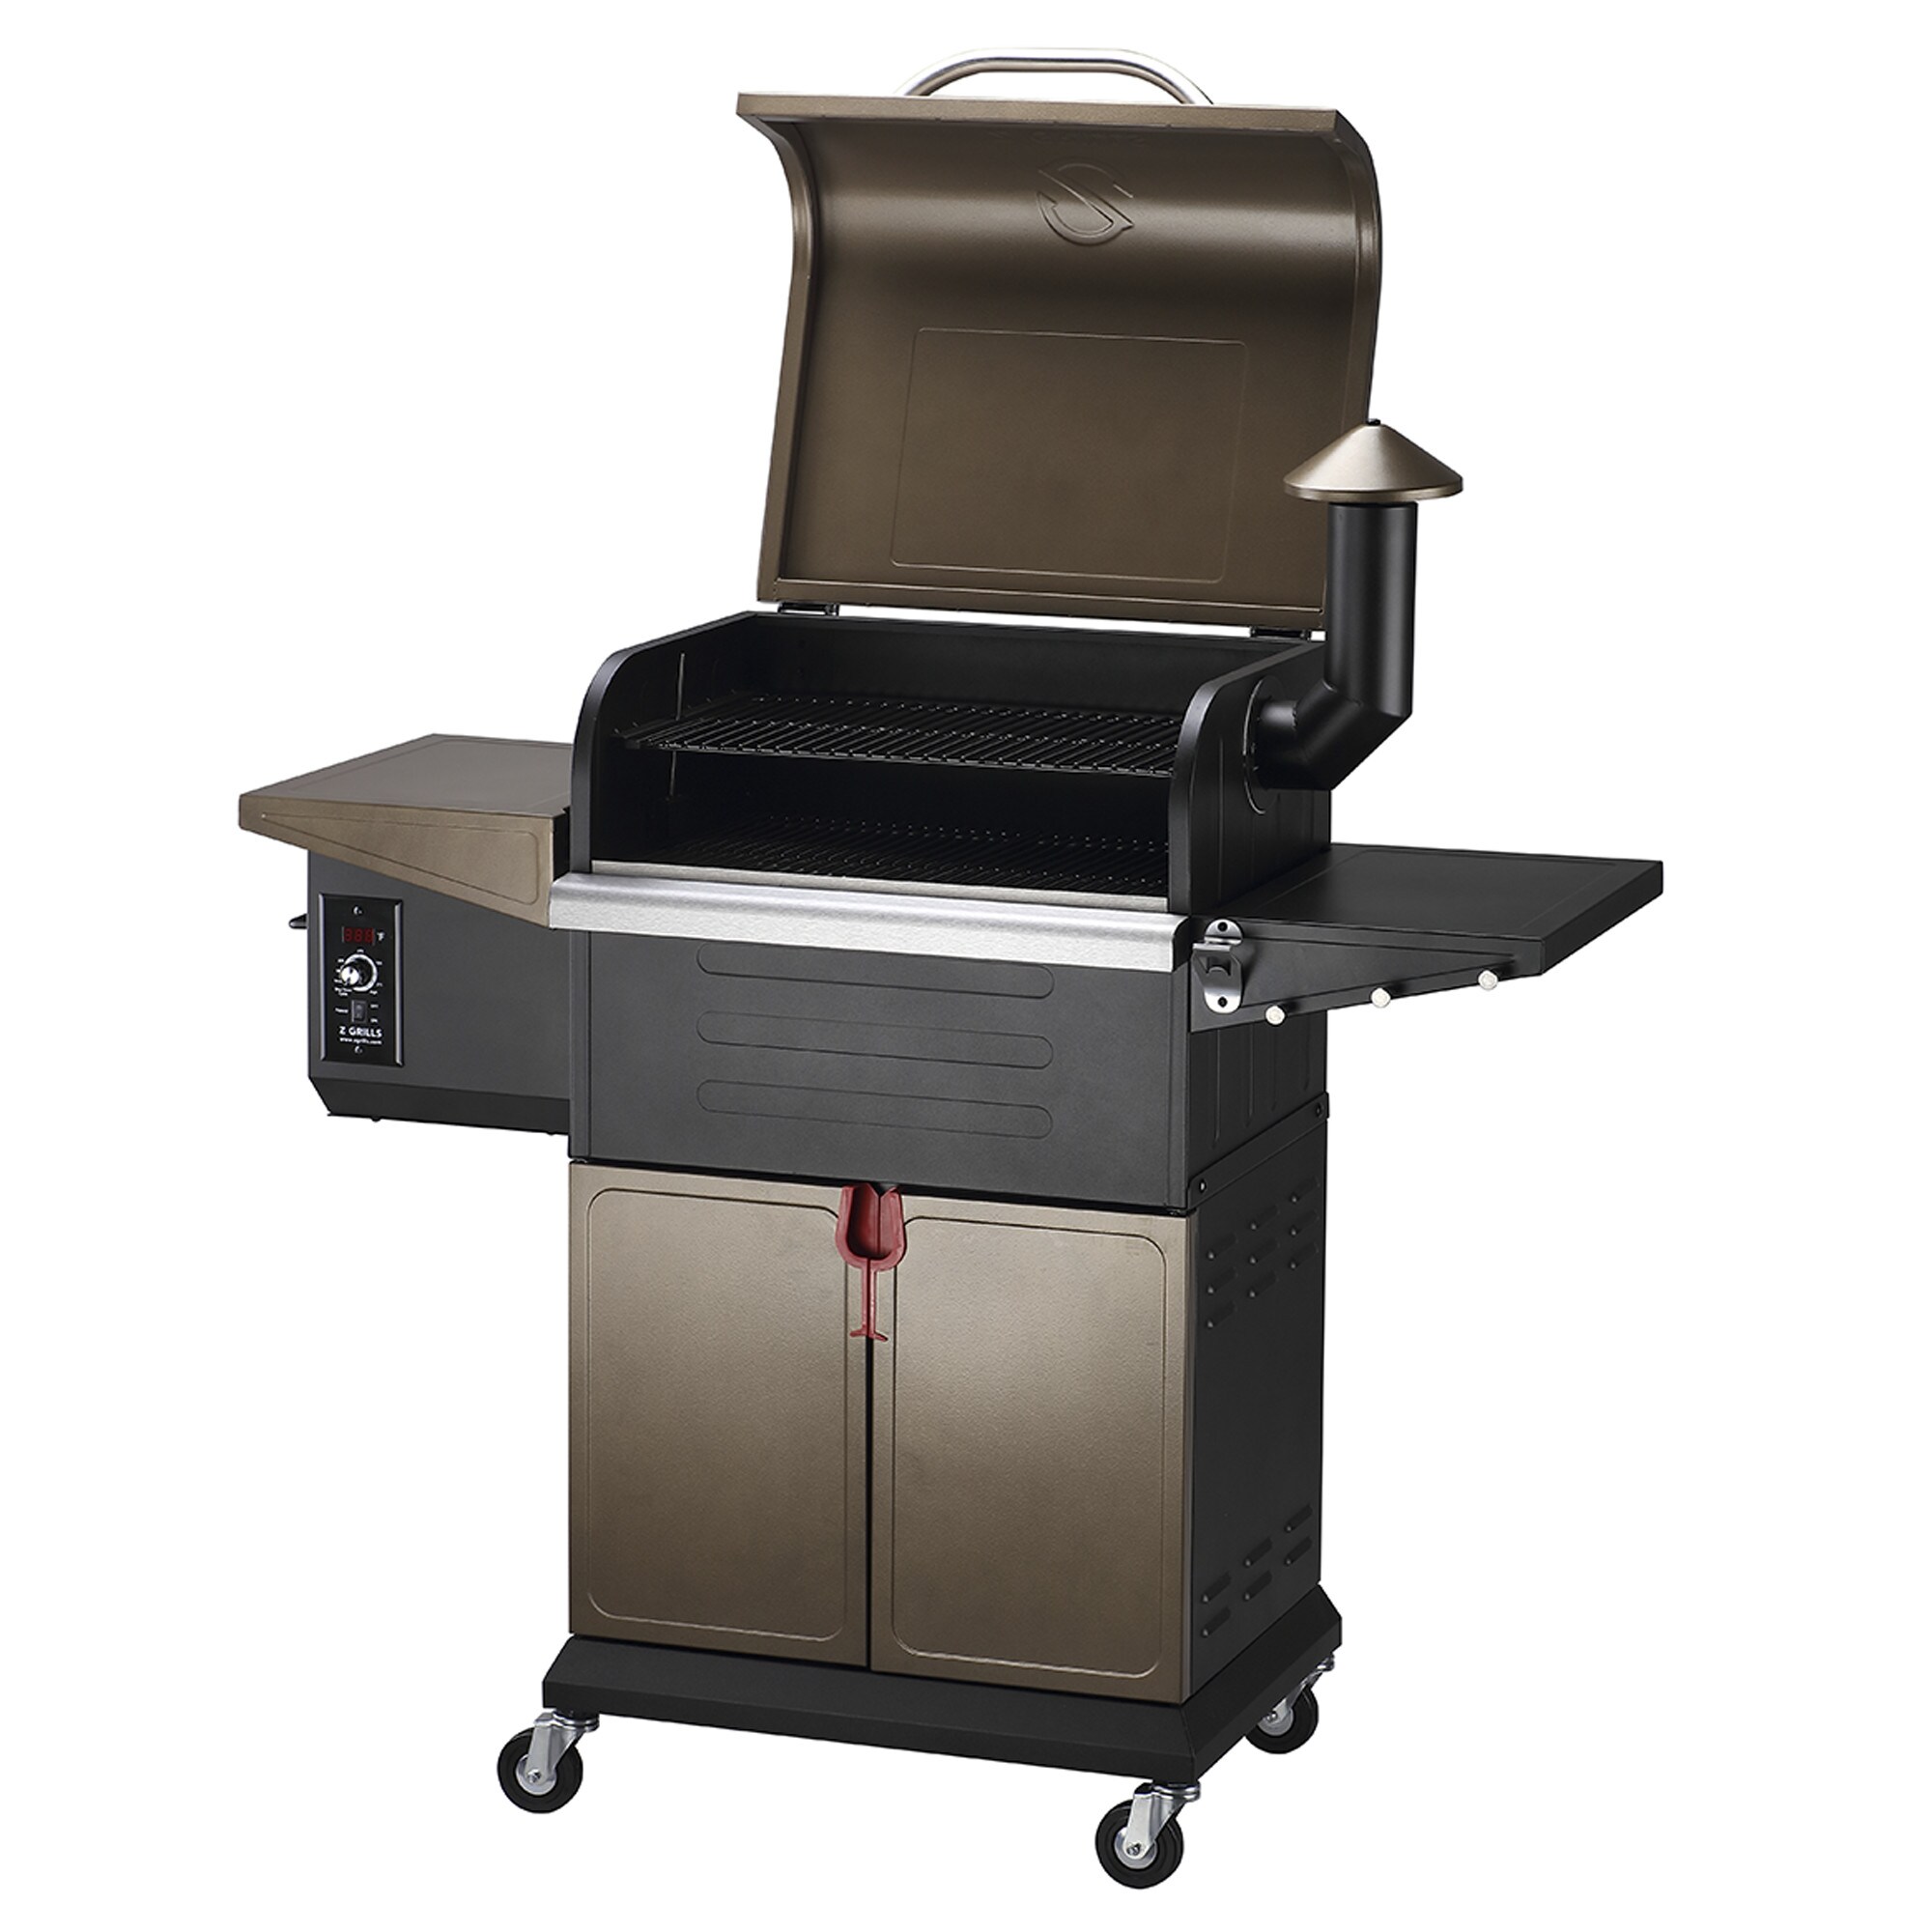 Grill Cleaning Memphis Pro Pellet Grill 